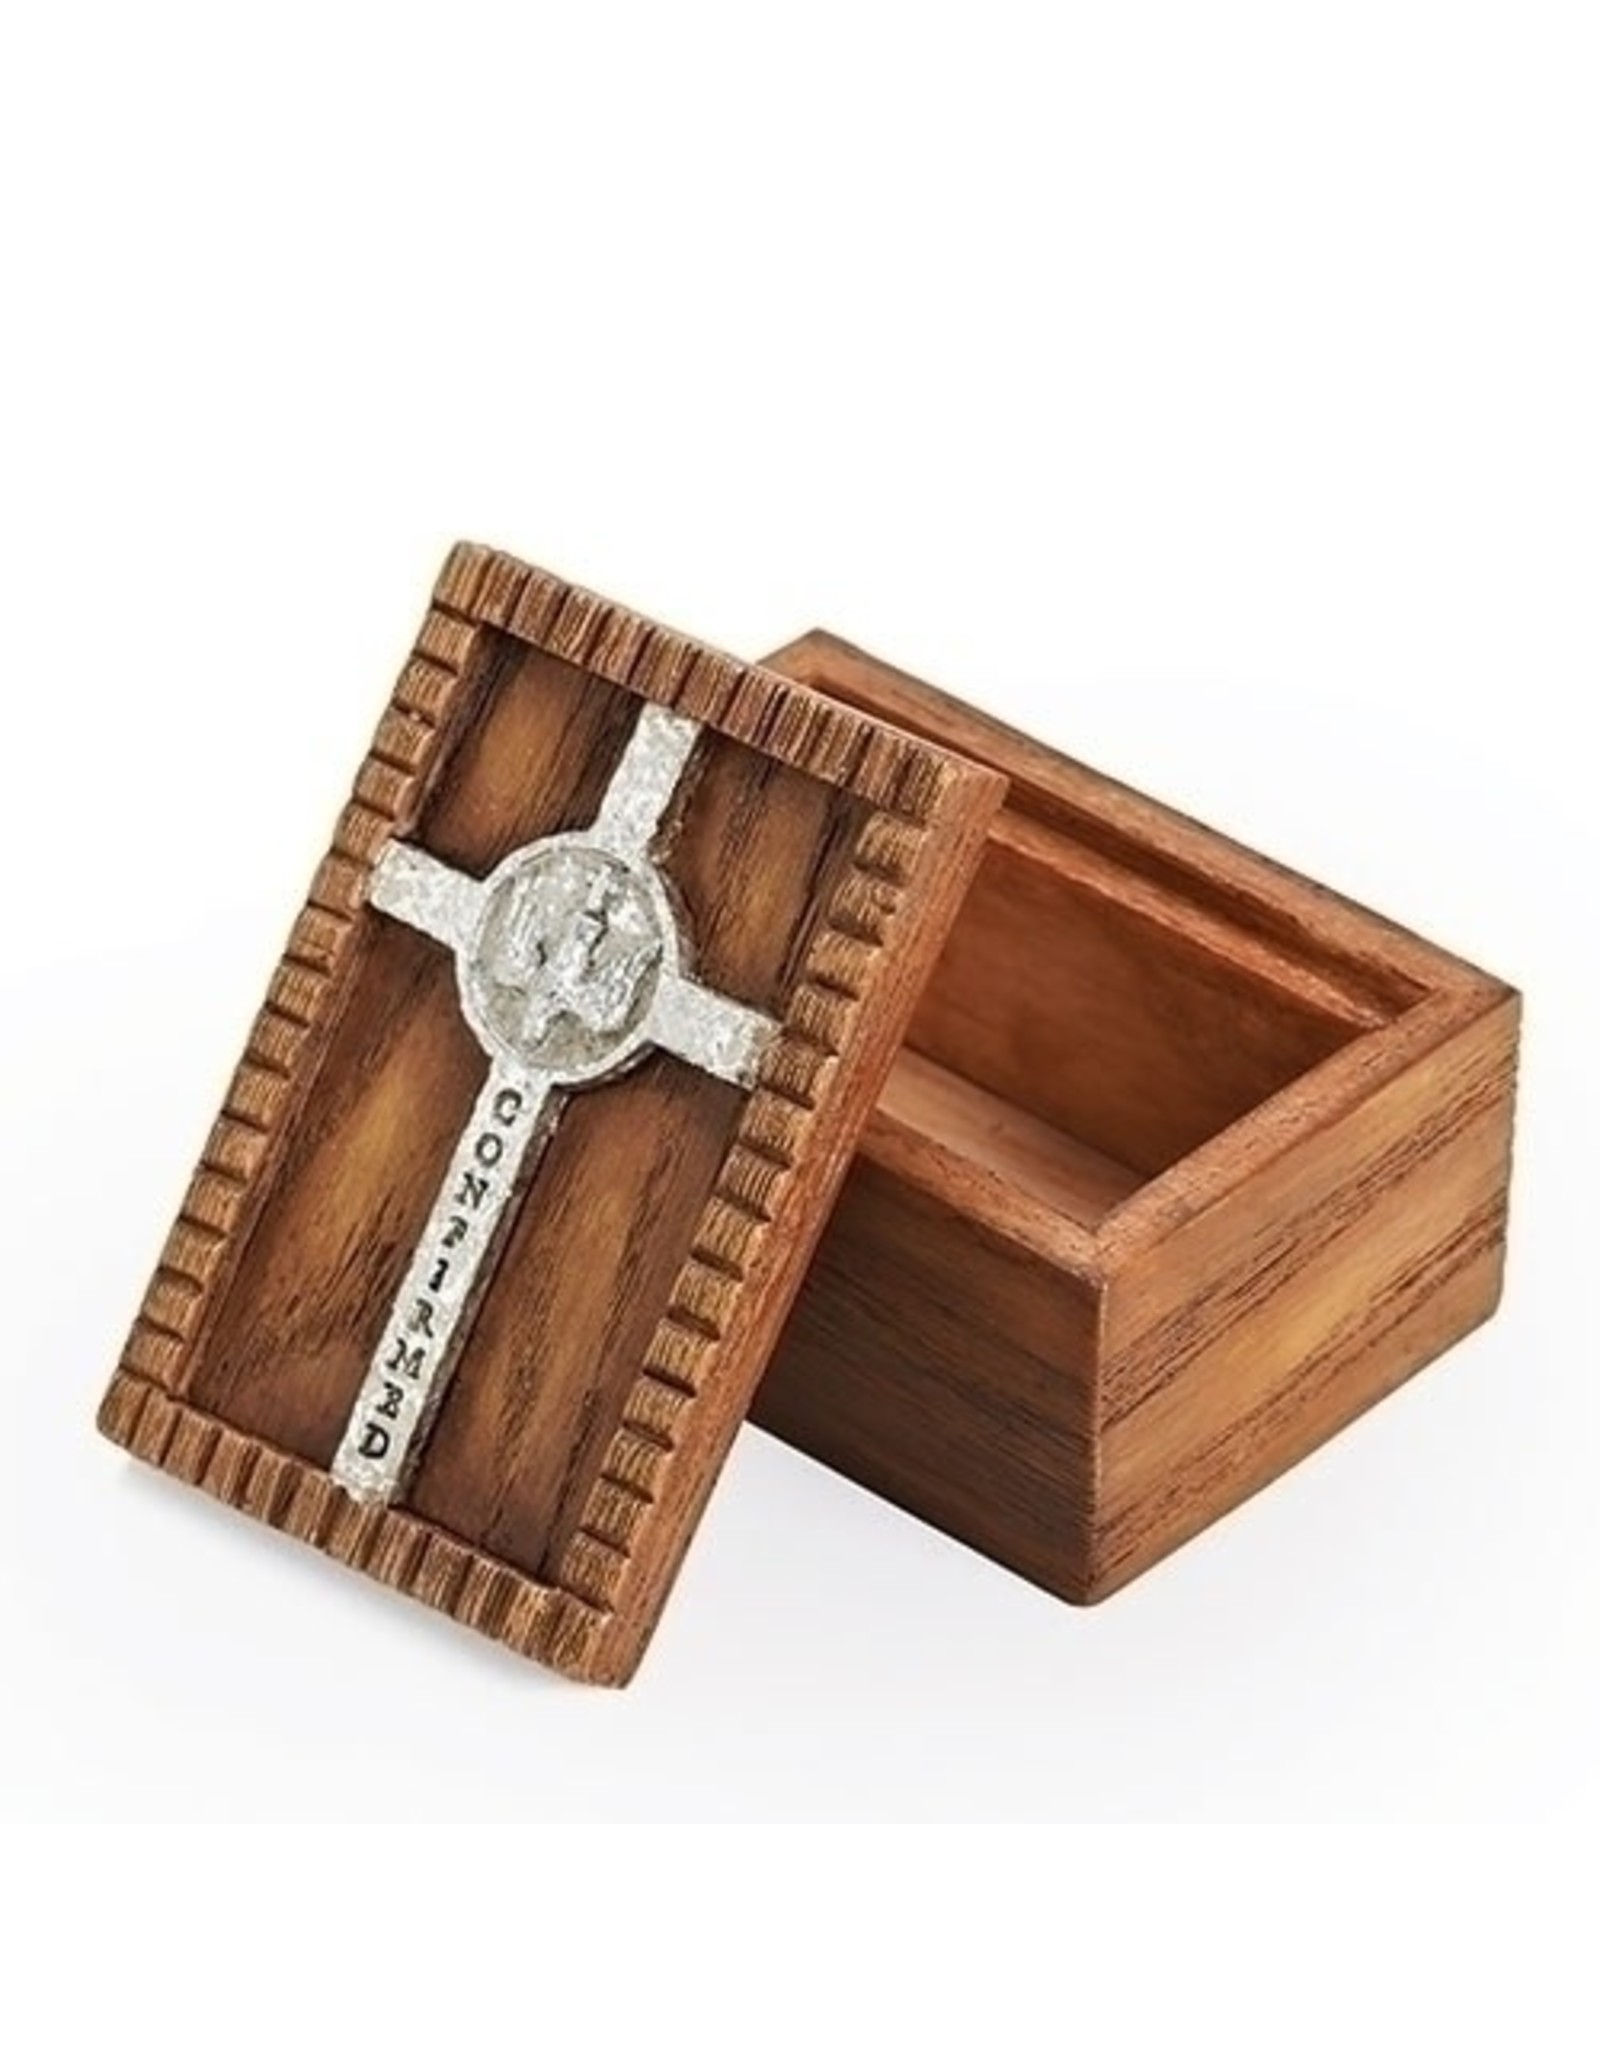 Roman Confirmation - Wooden Box with Silver Cross Emblem